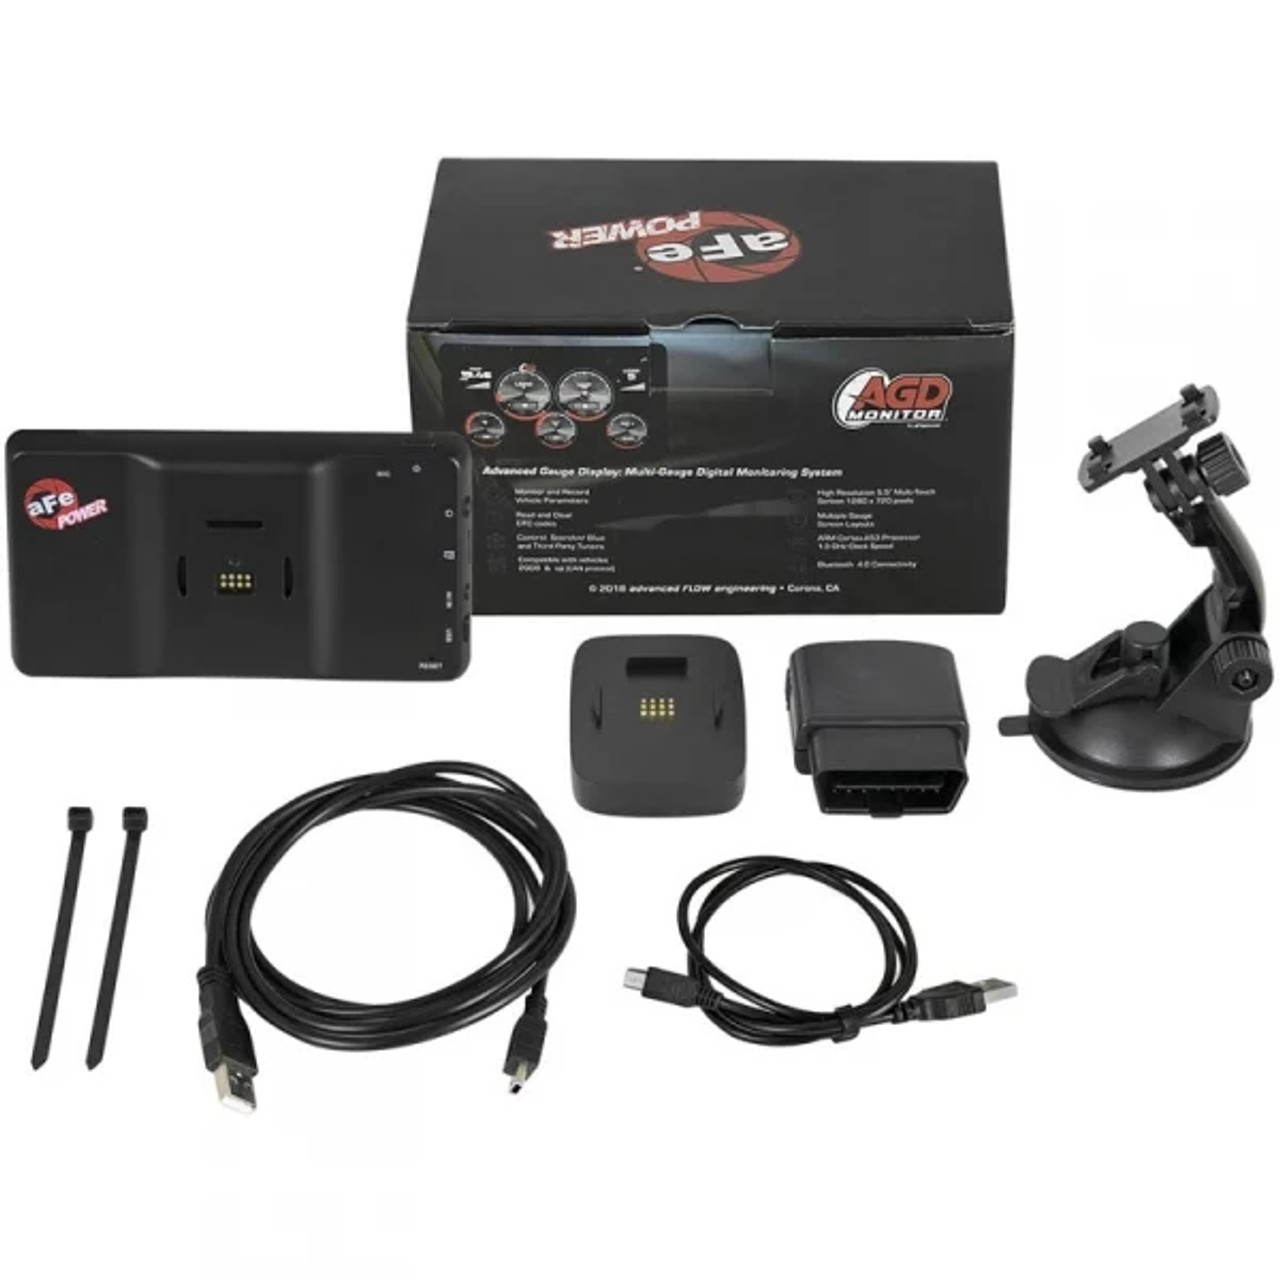 AFE AGD Advanced Gauge Display Monitor (See Vehicle Fitment) (AFE77-91001)-Kit View